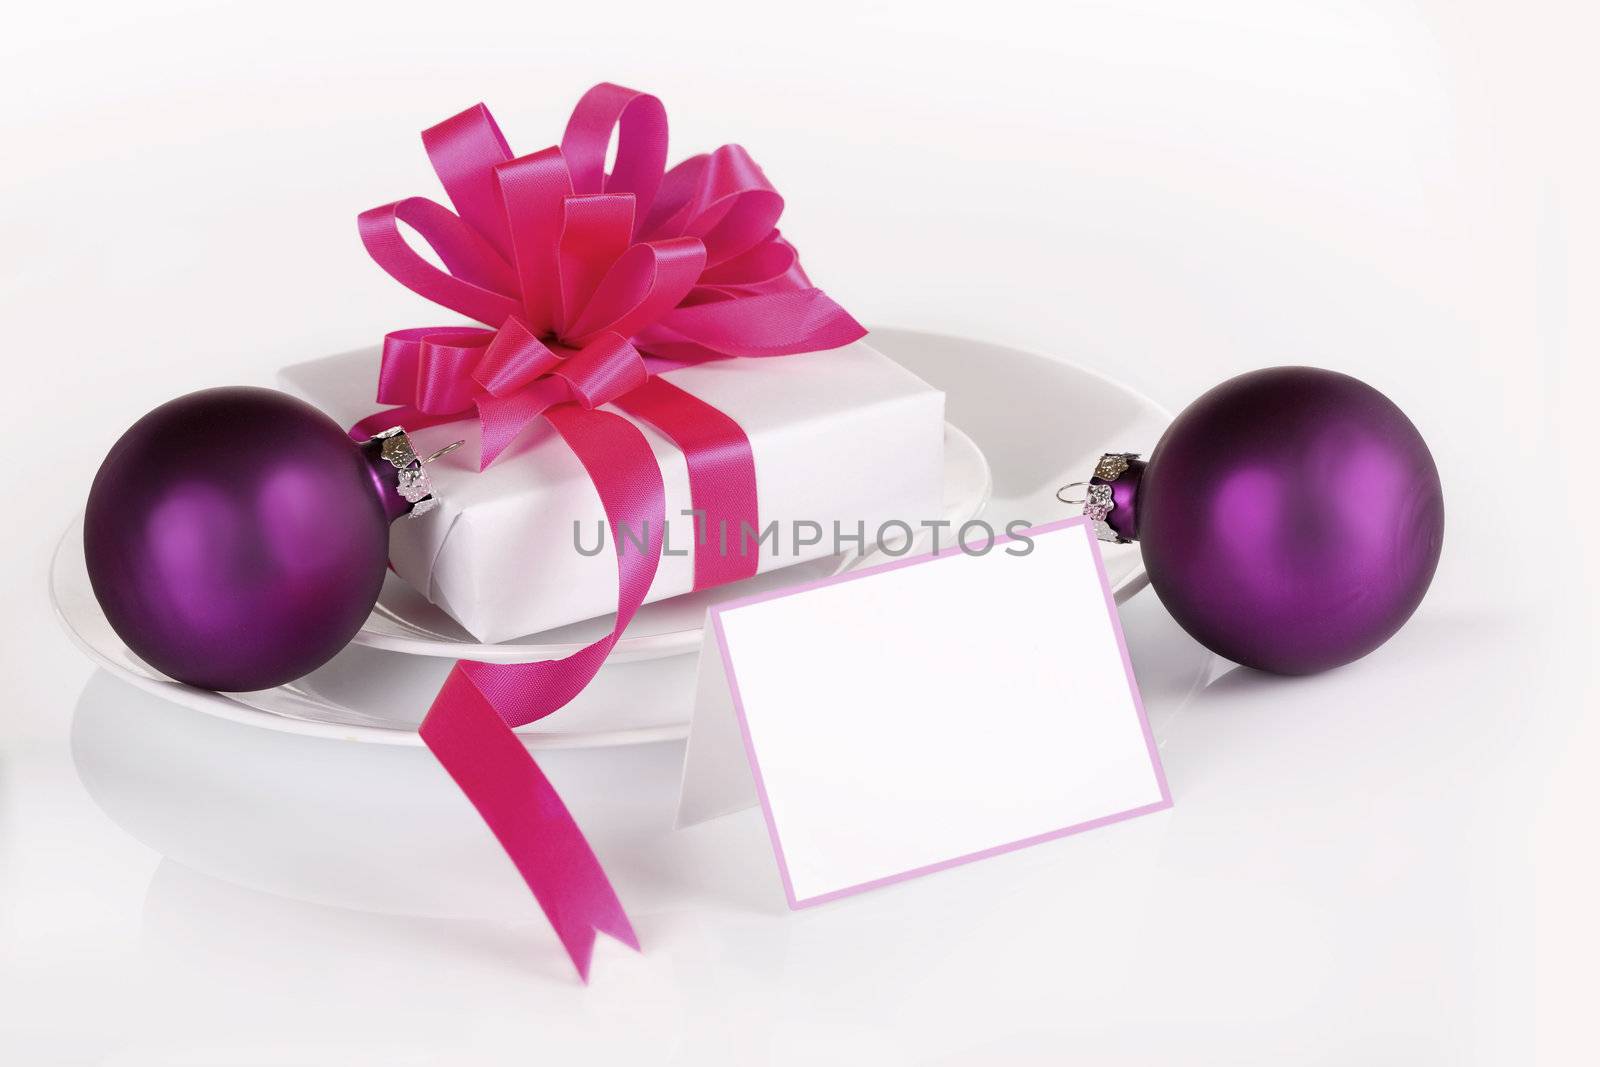 White present with pink ribbons and purple ornaments, isolated with blank name card